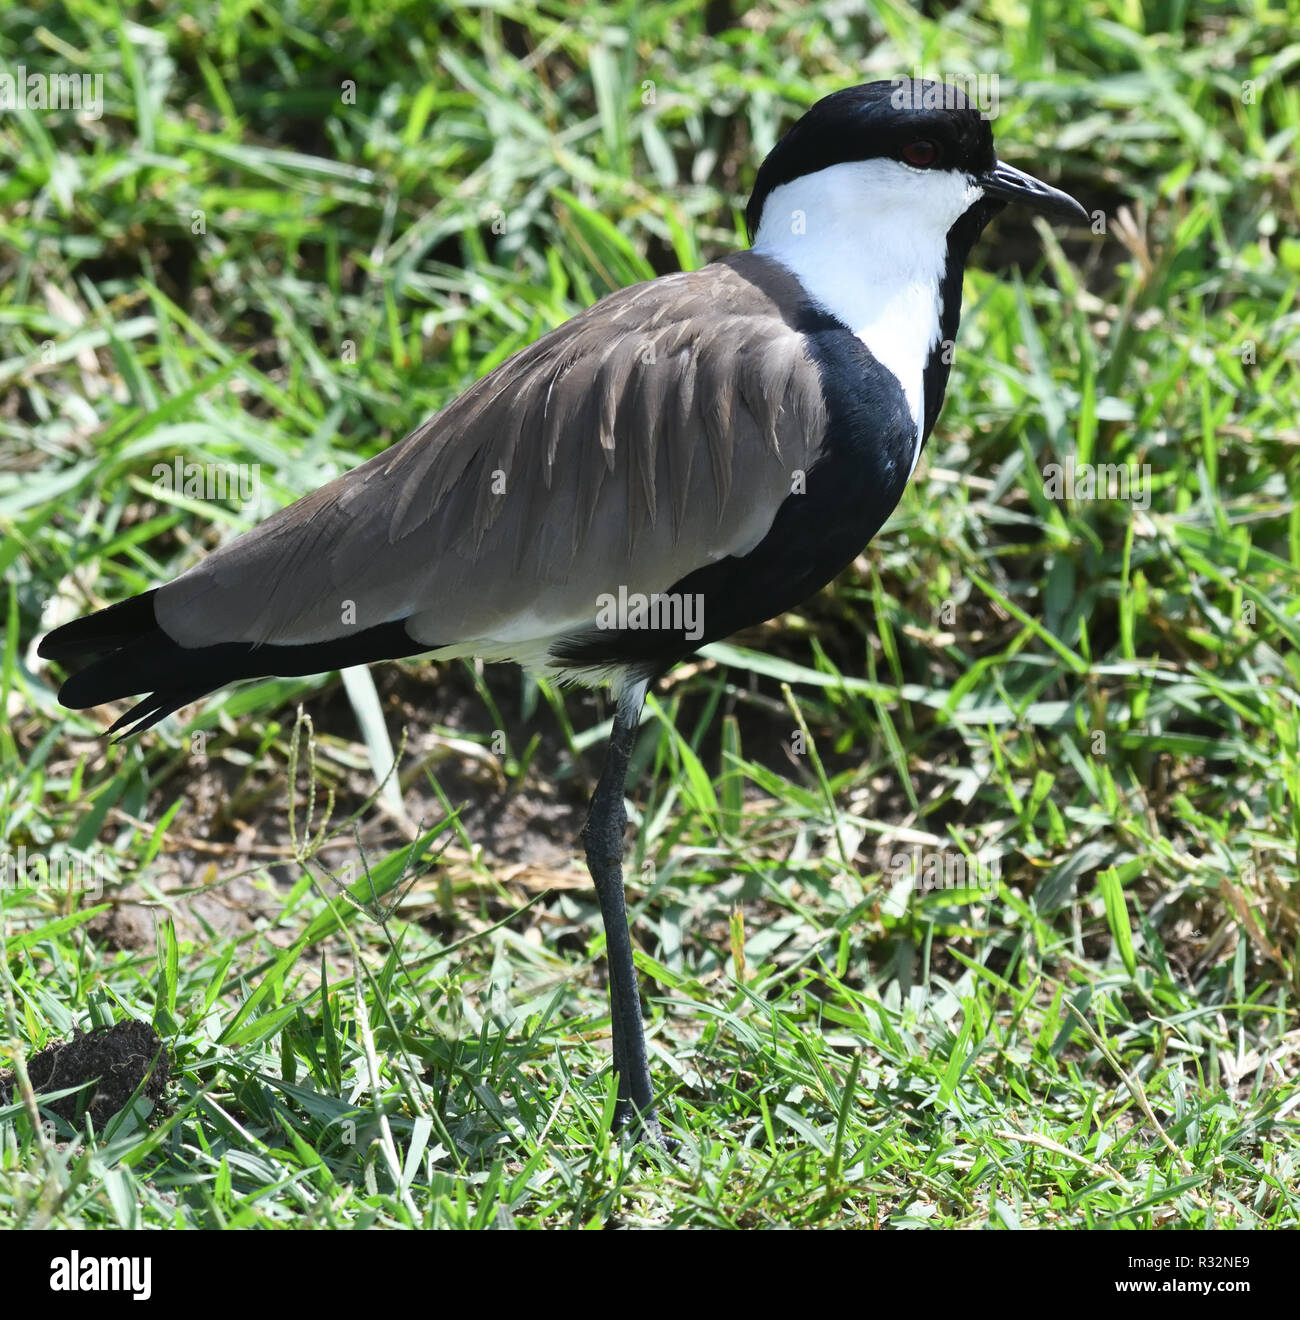 The spur-winged lapwing or spur-winged plover (Vanellus spinosus). Queen Elizabeth National Park, Uganda. Stock Photo